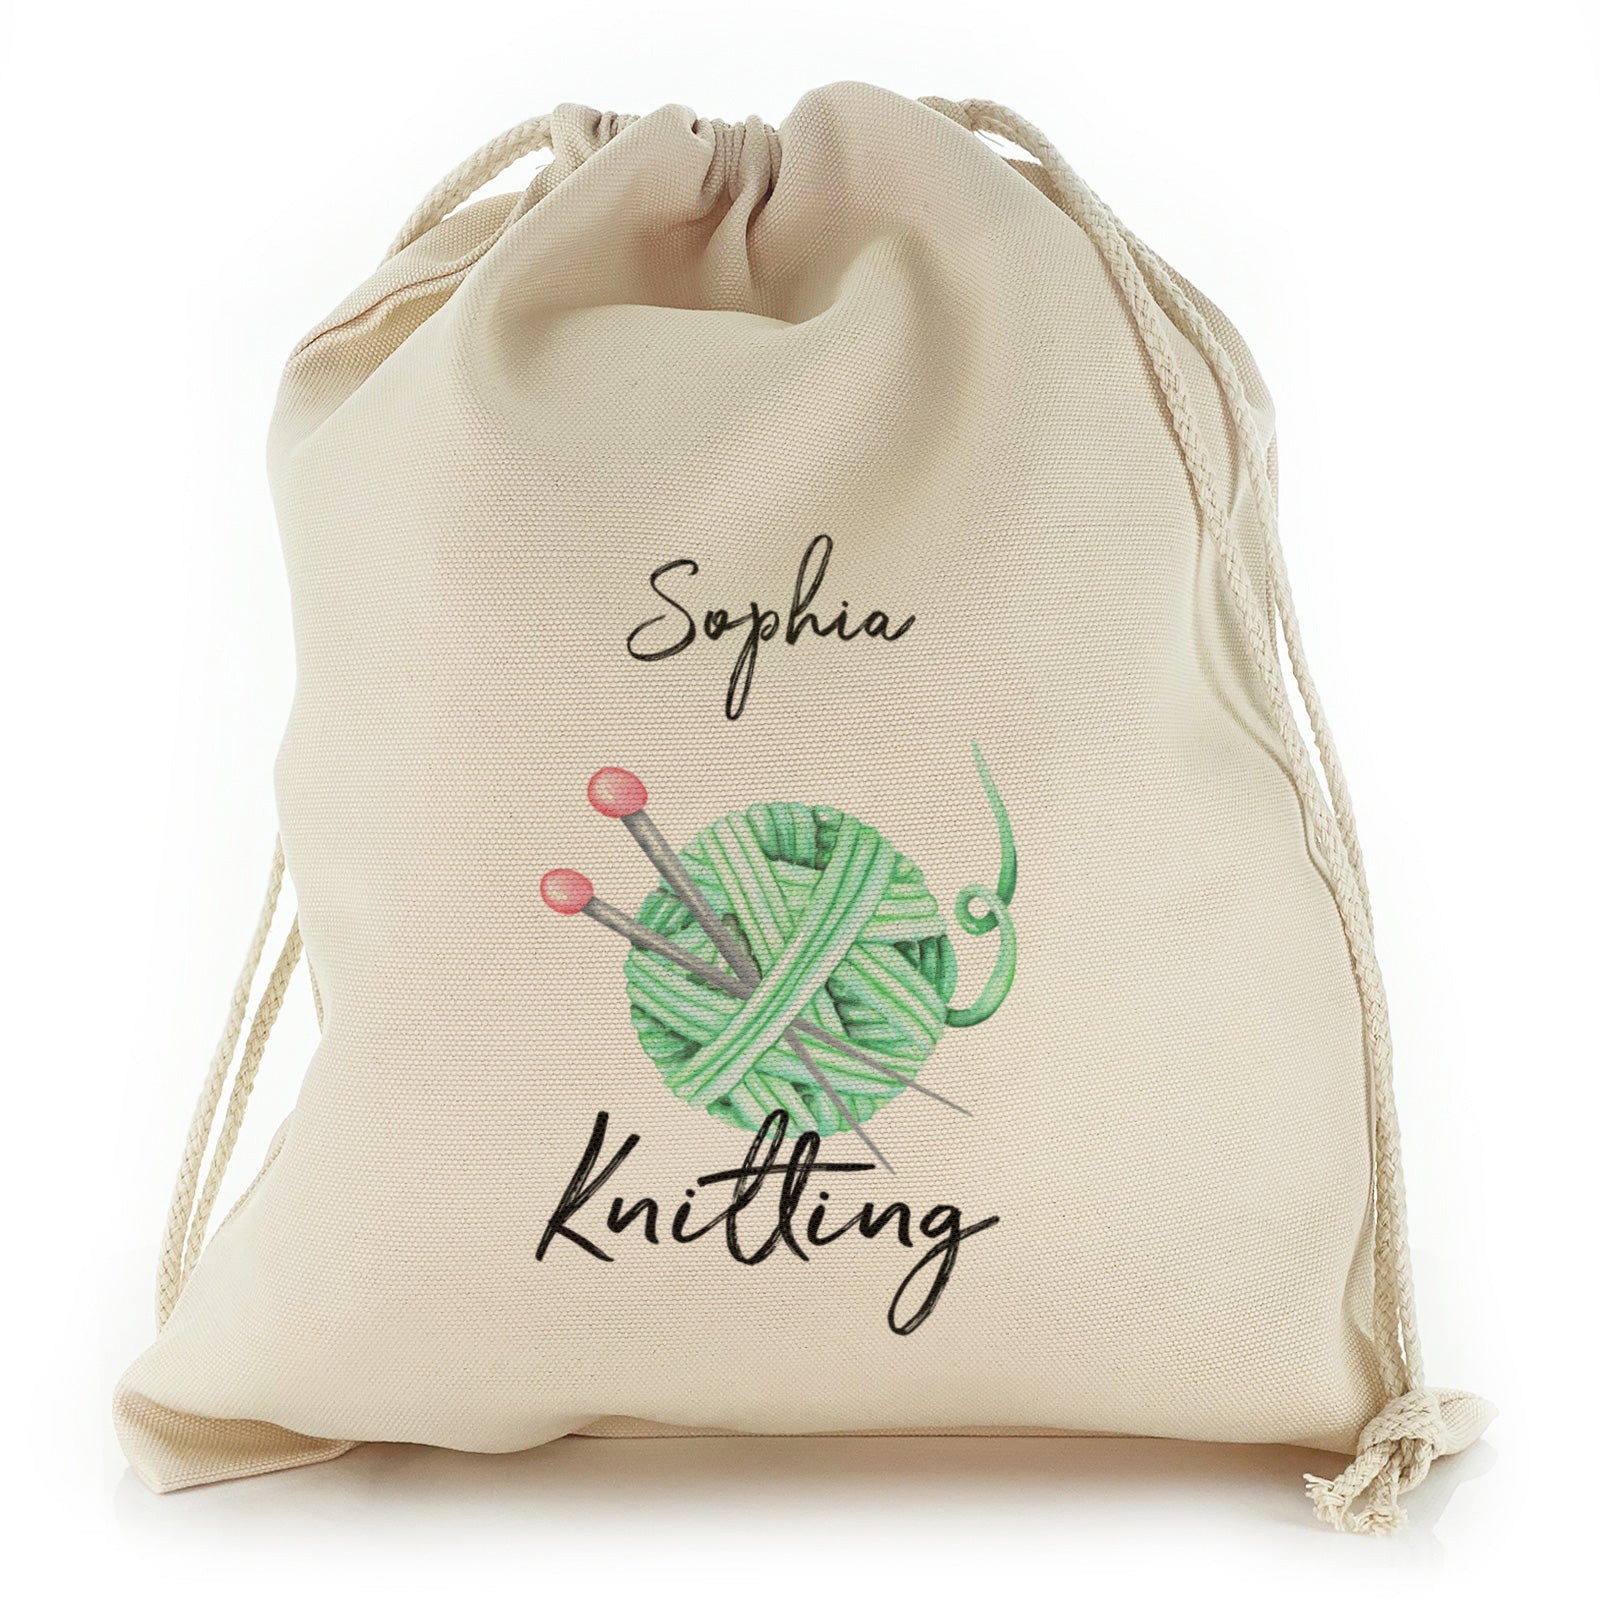 Personalised Canvas Sack with Stylish Text on Green Yarn Ball and Needles Design